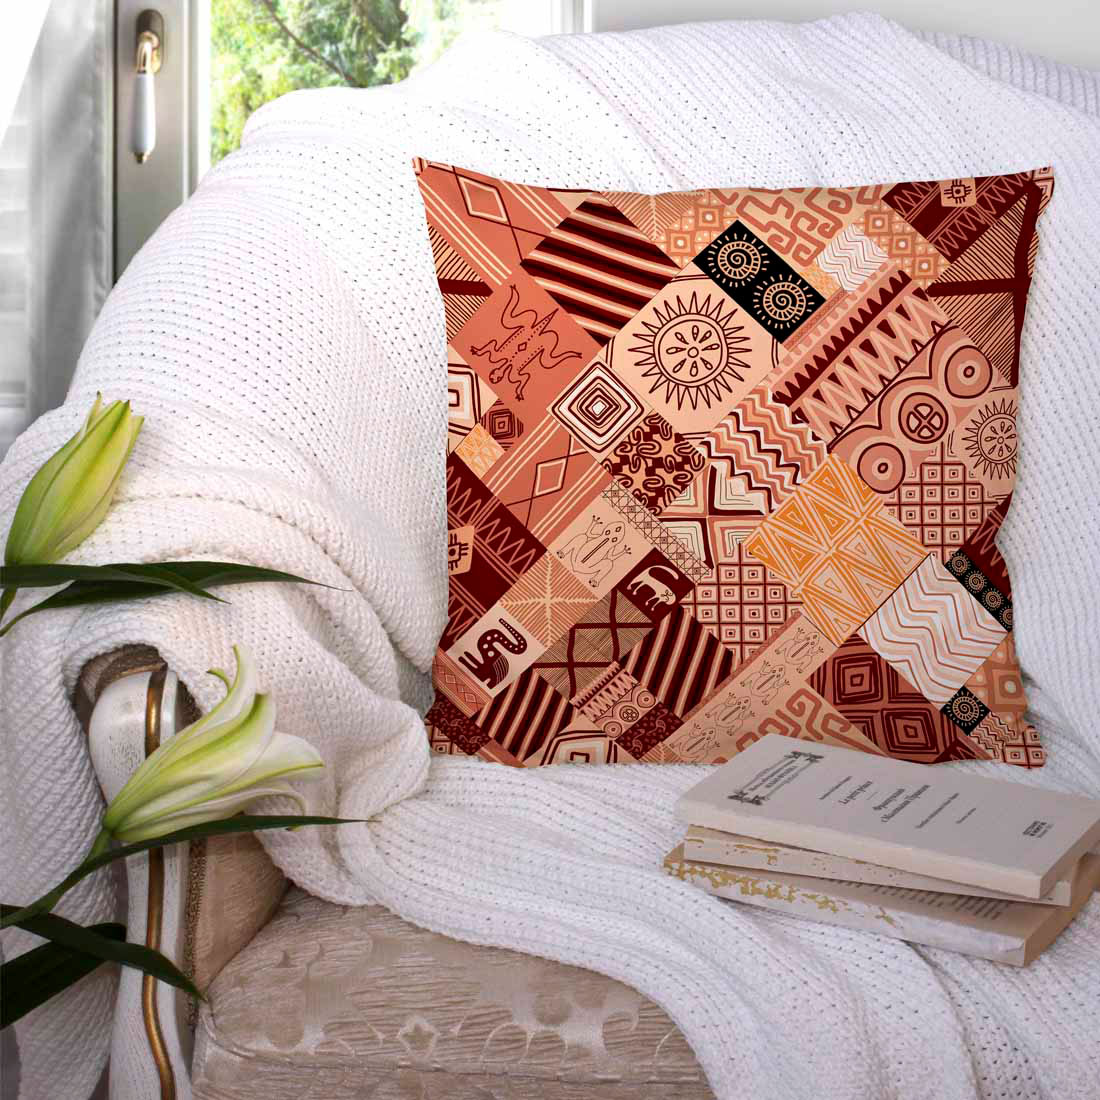 Image of a pillow with charming patterns in African style.